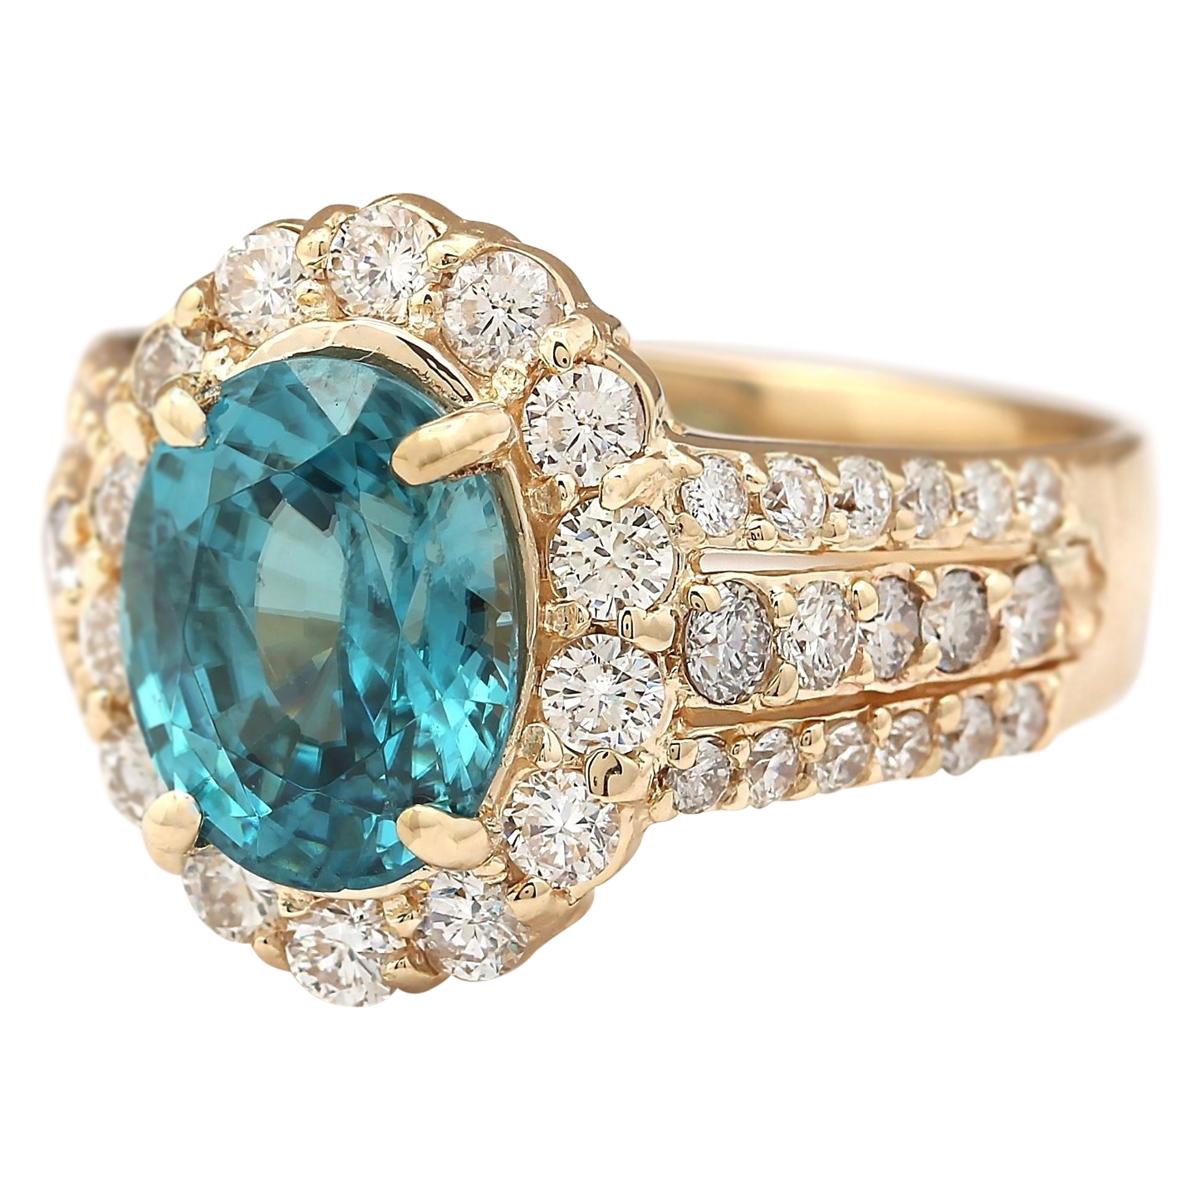 Stamped: 14K Yellow Gold
Total Ring Weight: 9.3 Grams
Total Natural Zircon Weight is 4.39 Carat (Measures: 10.00x8.00 mm)
Color: Blue
Total Natural Diamond Weight is 1.50 Carat
Color: F-G, Clarity: VS2-SI1
Face Measures: 15.50x12.85 mm
Sku: [704010W]